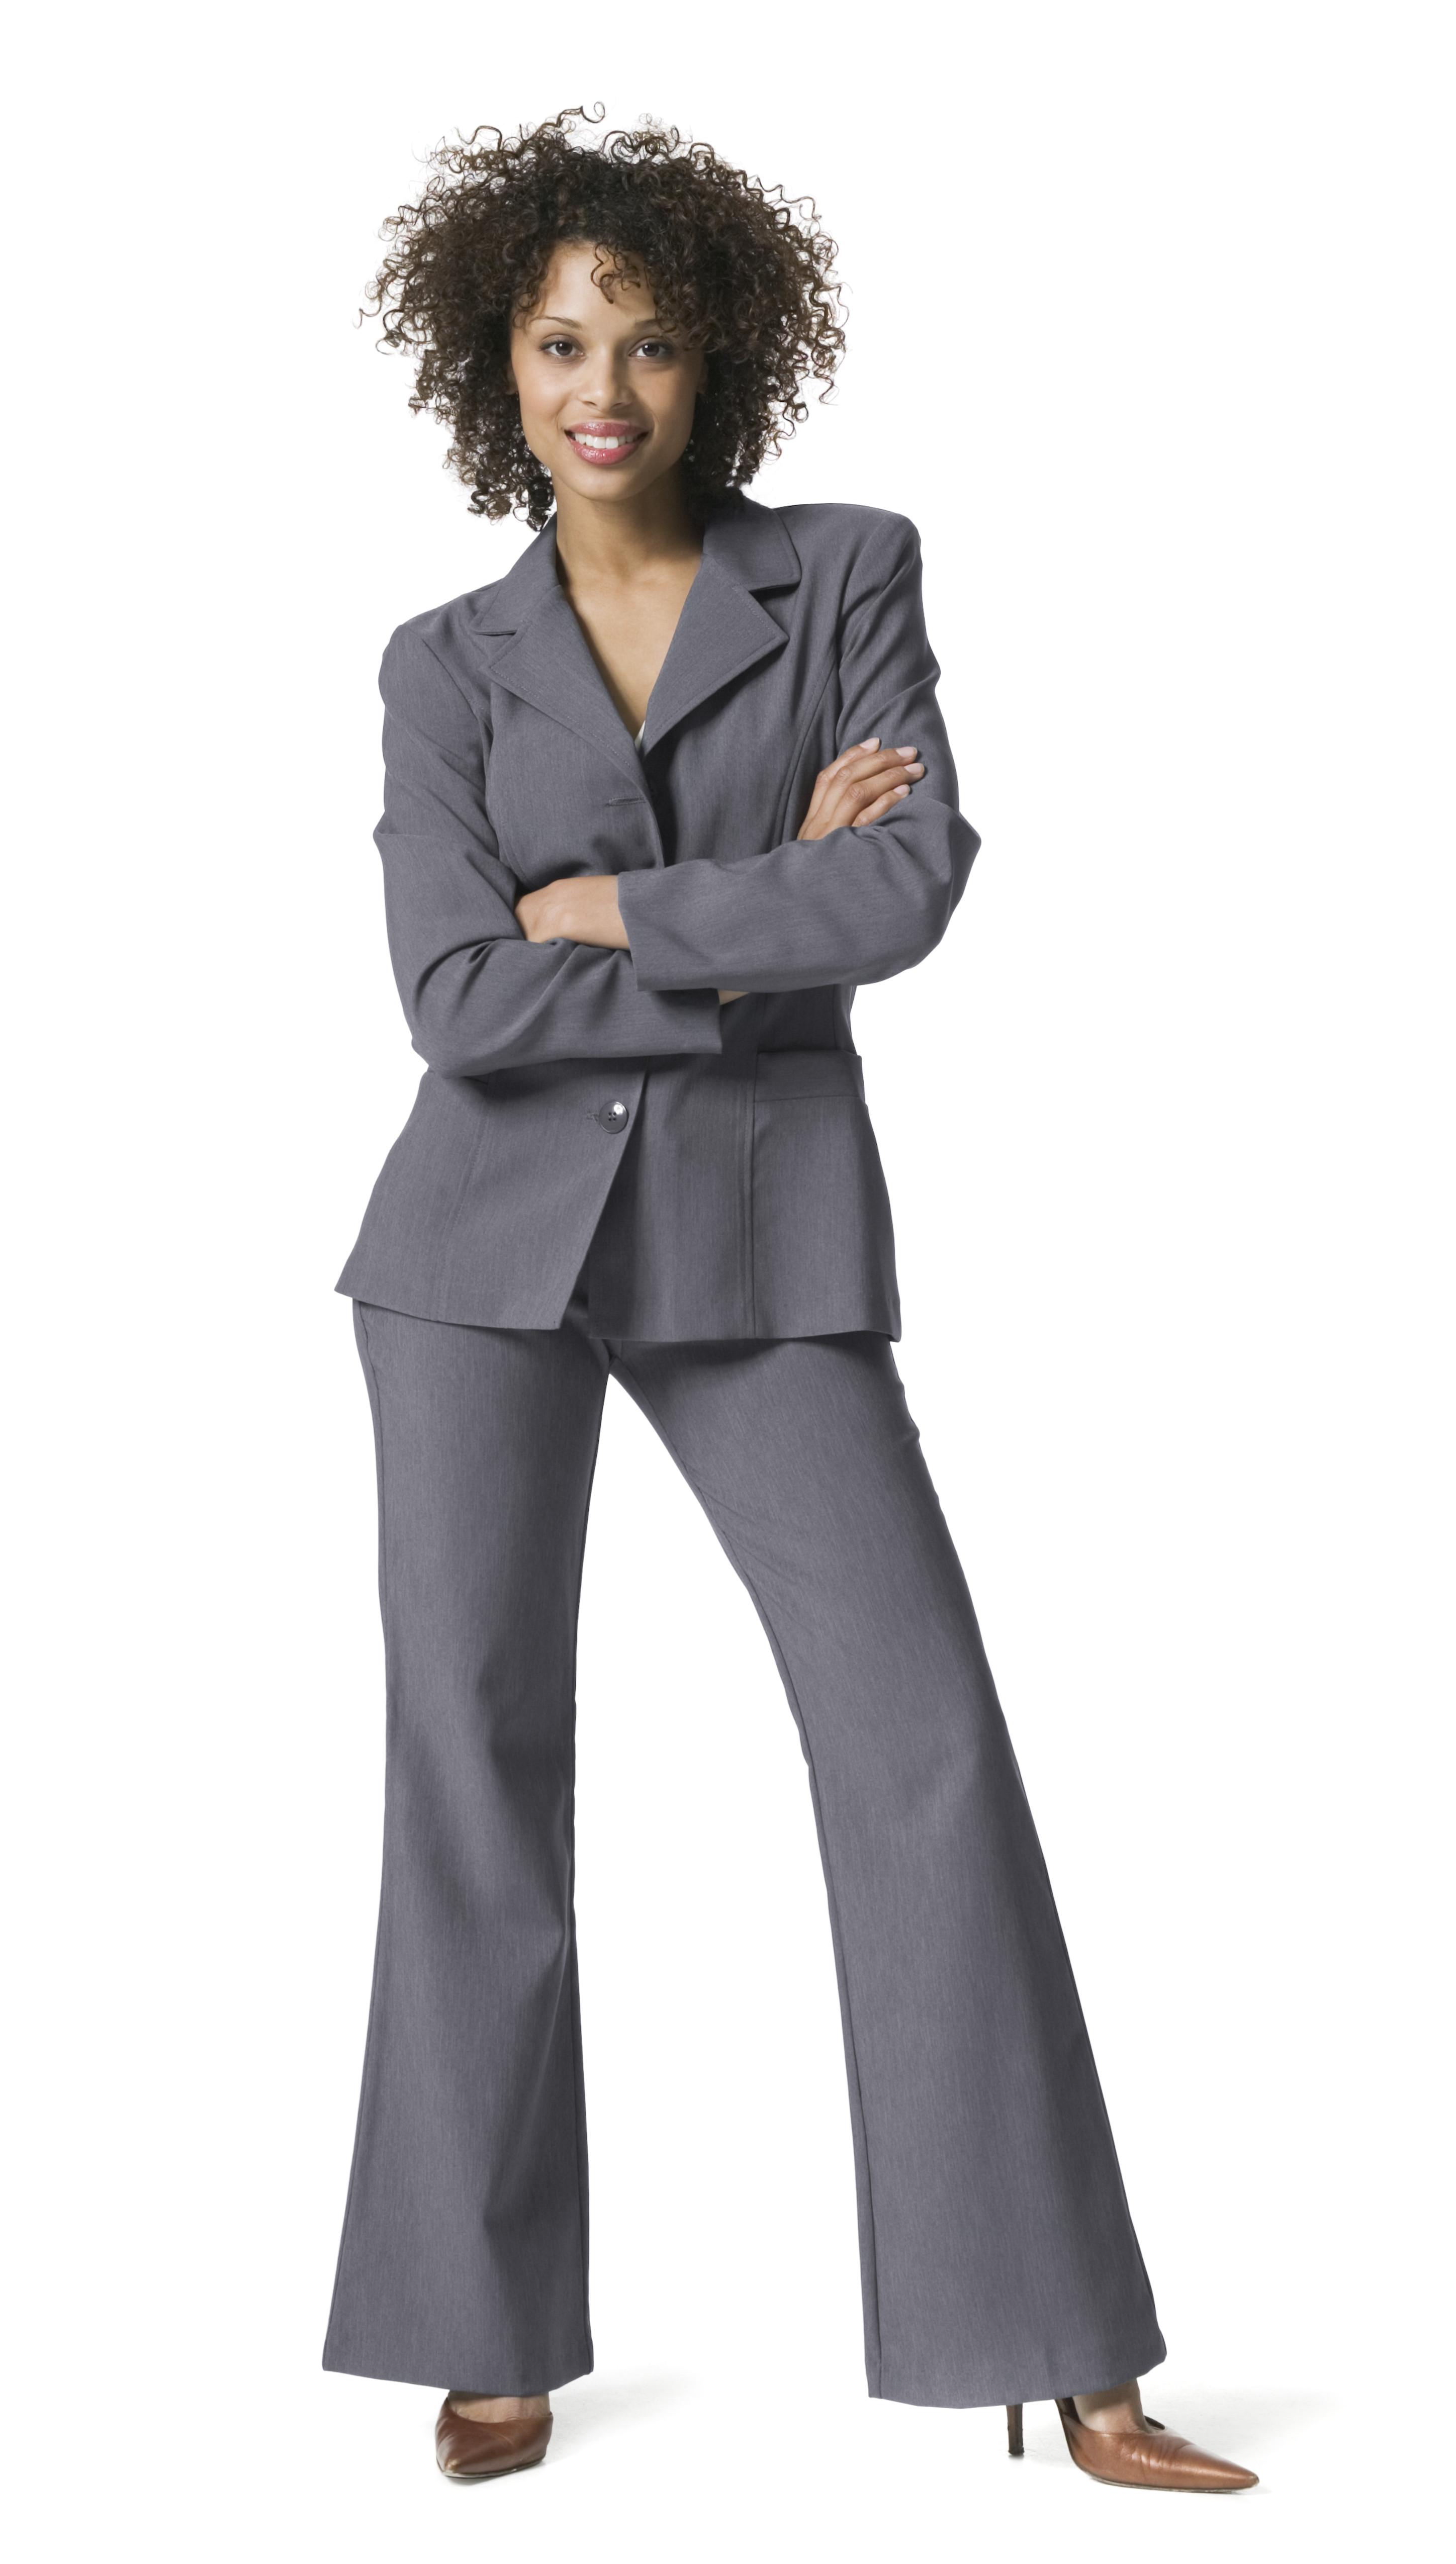 full length business portrait of a young adult woman in a grey suit as she folds her arms and smiles